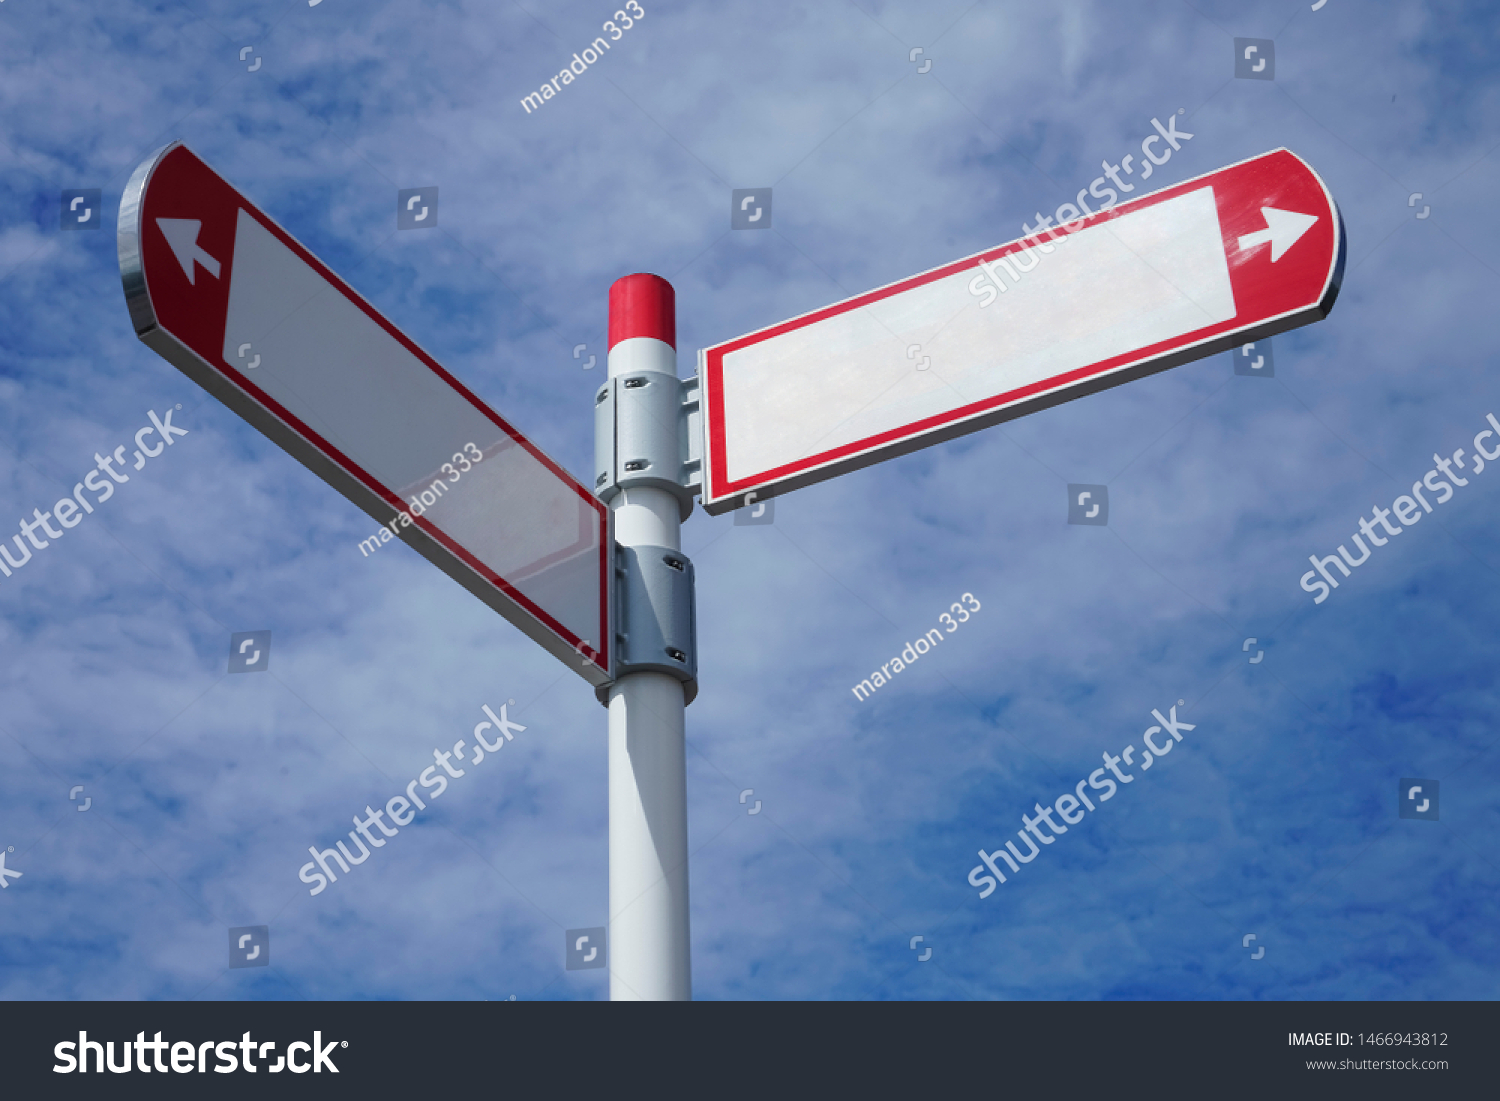 red direction sign on the pole against the blue cloudy sky. white arrow signal against heaven with clods.  empty frame blank  #1466943812